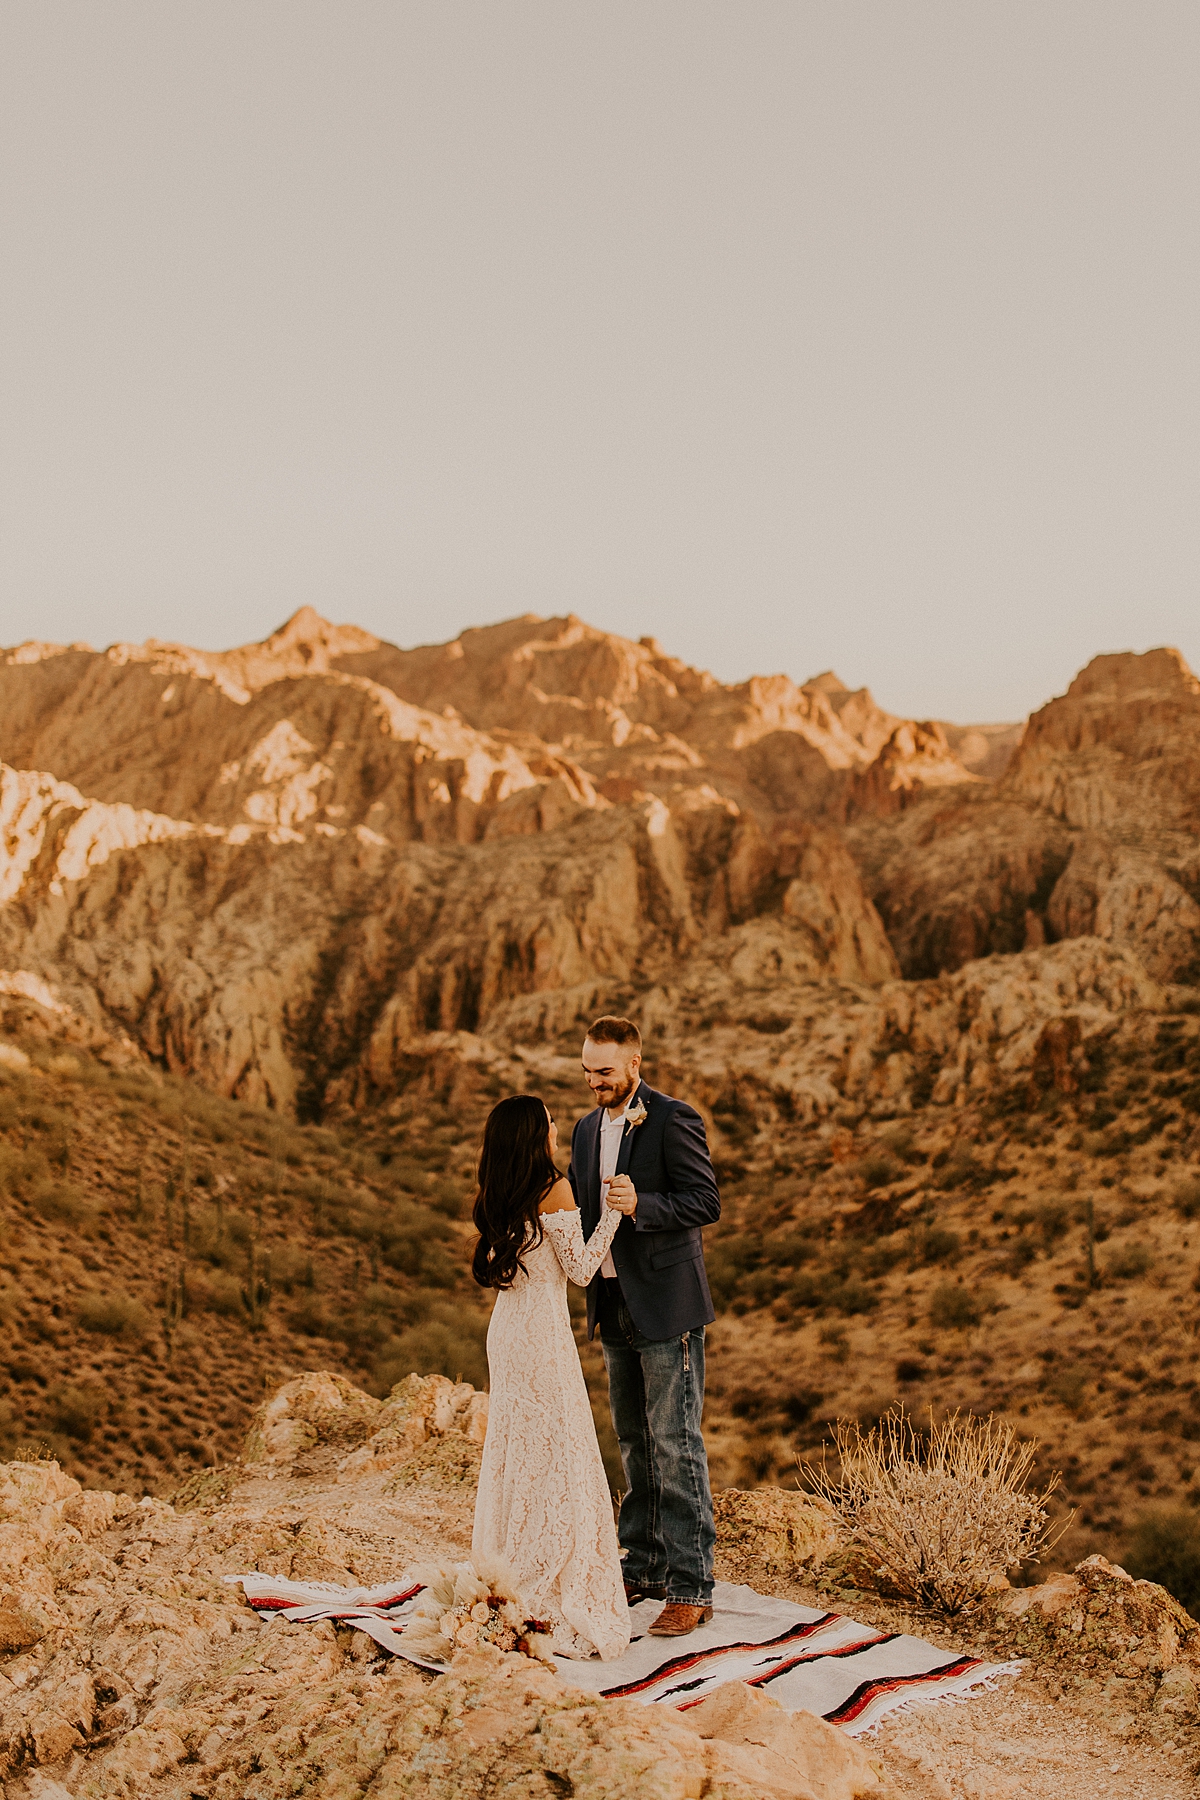 Intimate-elopement-in-superstition-mountain-wilderness-allison-slater-photography61.jpg